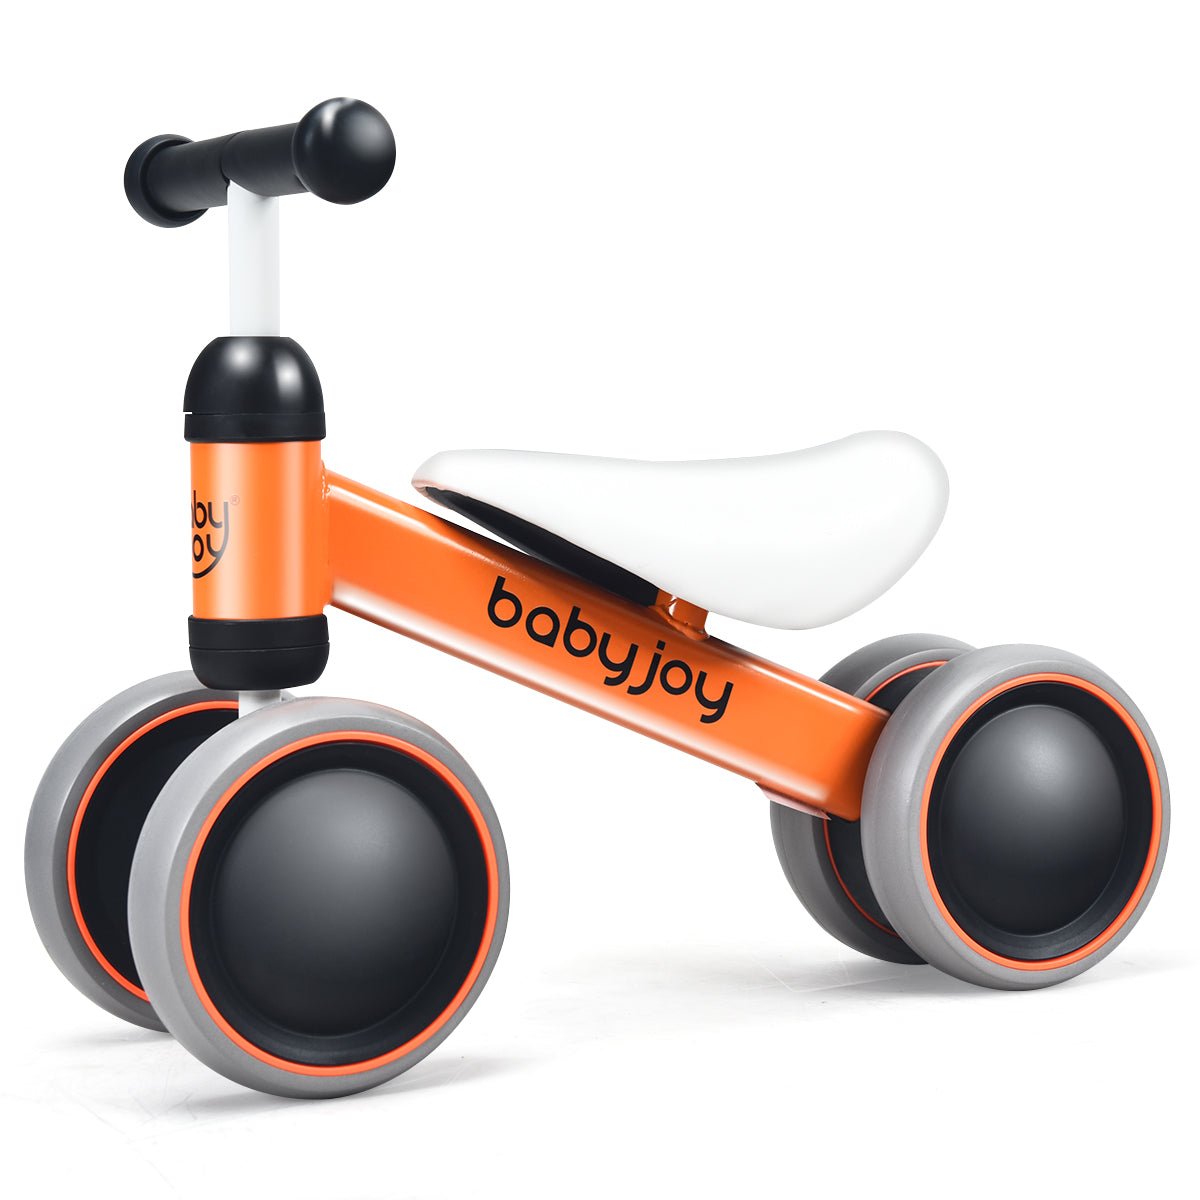 Empowering Young Riders: Orange 4-Wheel Balance Training Bike for Little Ones